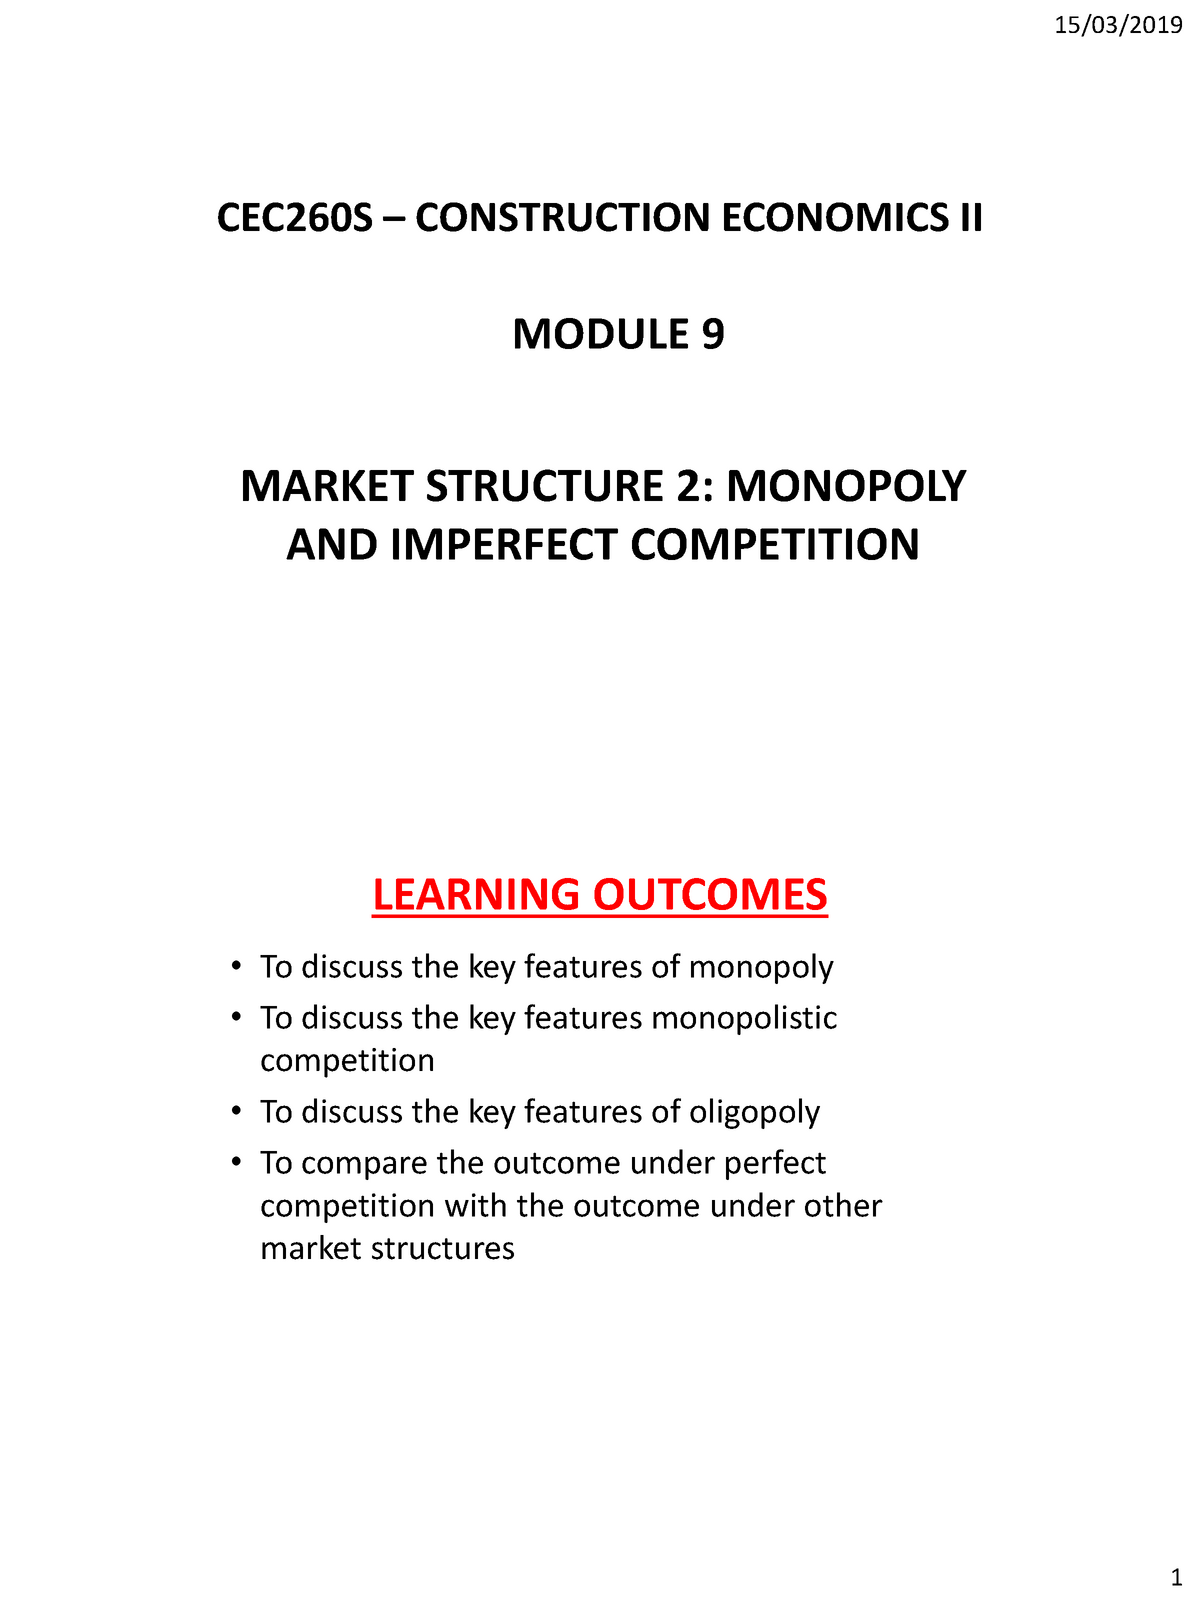 market structure essay questions and answers